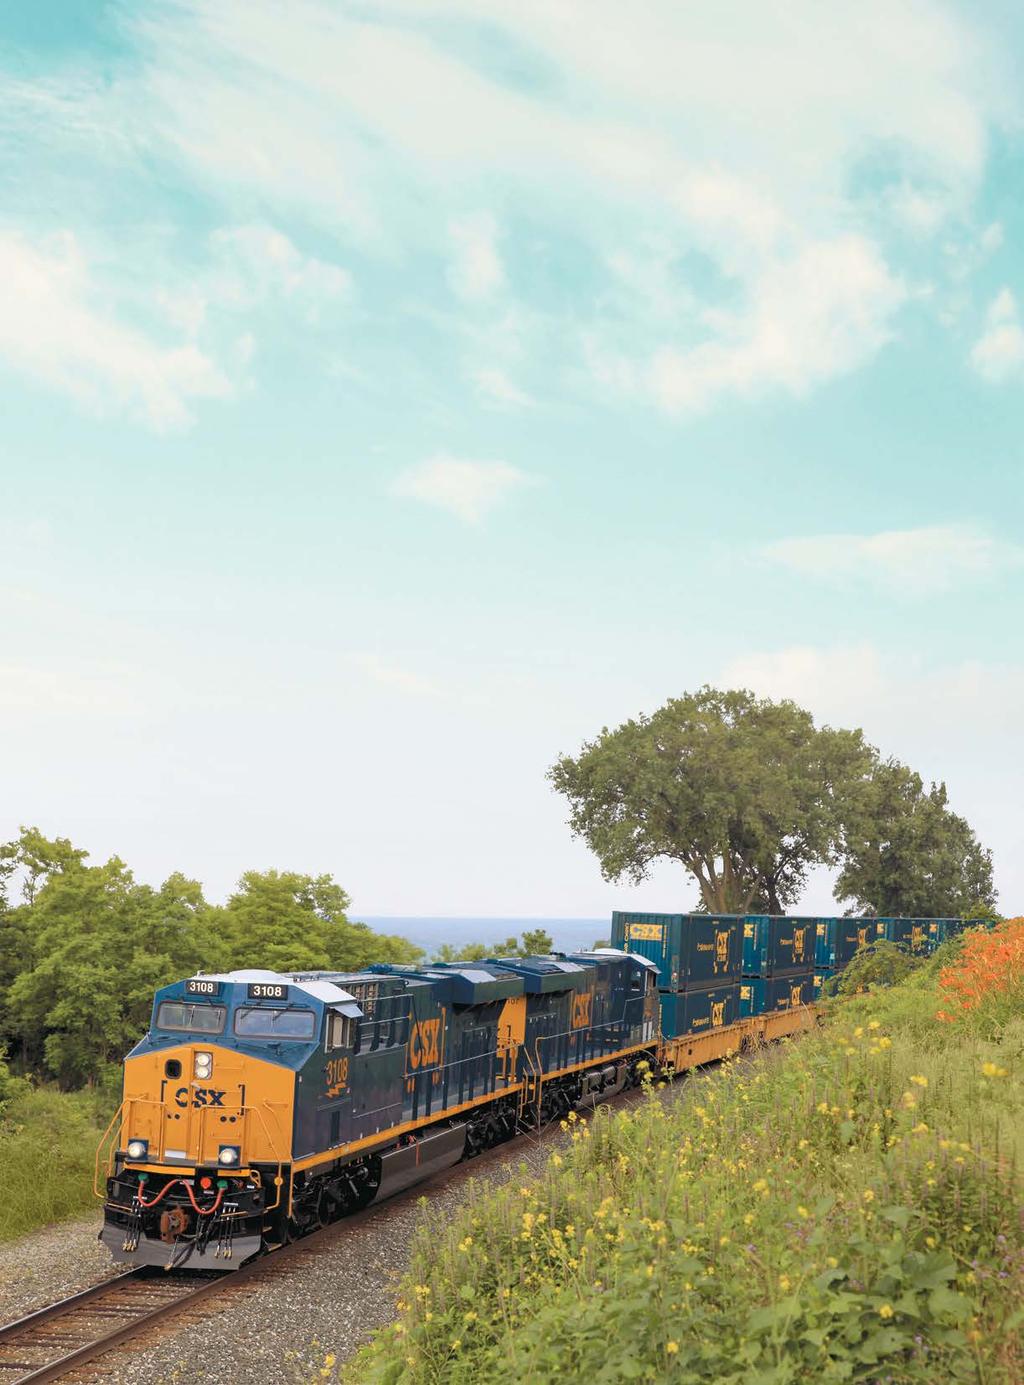 FULL TRUCKLOAD CROSS-BORDER SHIPPING SIMPLIFIED The new CSX Transportation-served, intermodal terminal in Salaberry-de-Valleyfield, Quebec, located 40 miles outside of Montreal, provides